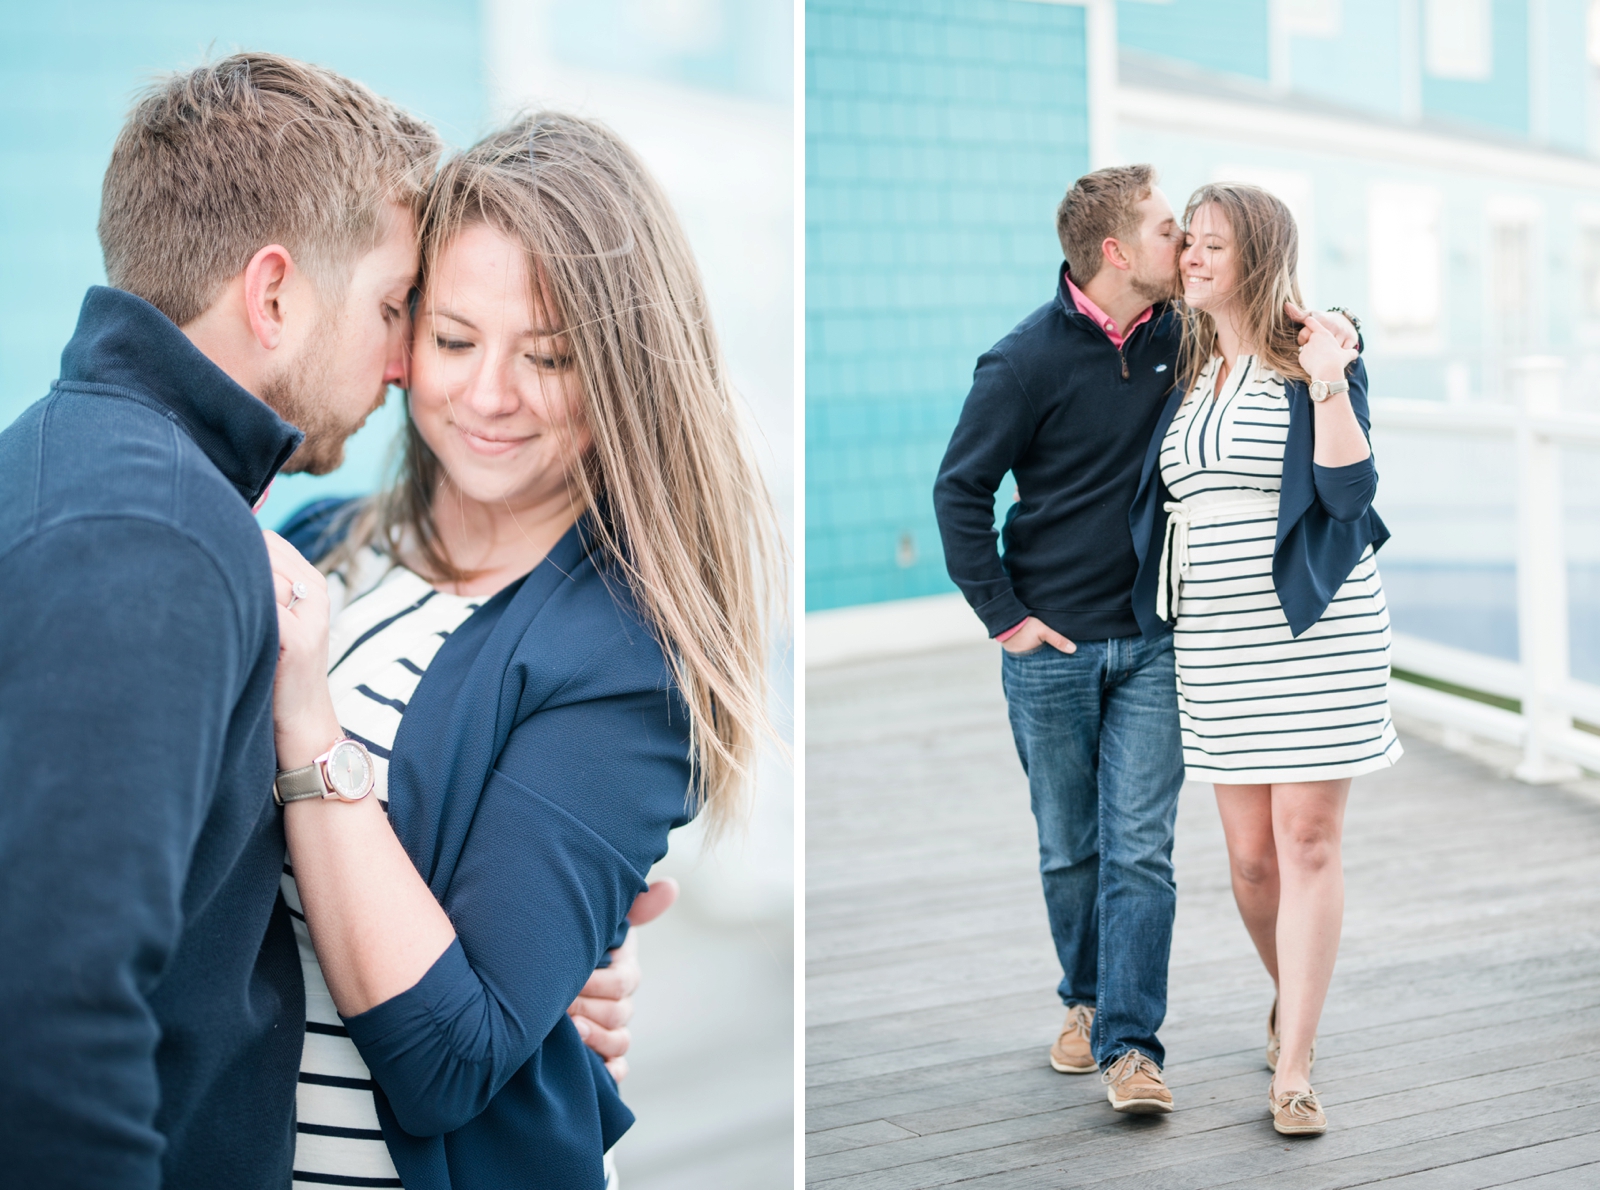 eastern-shore-cape-charles-waterfront-engagement-session-photo_7235.jpg